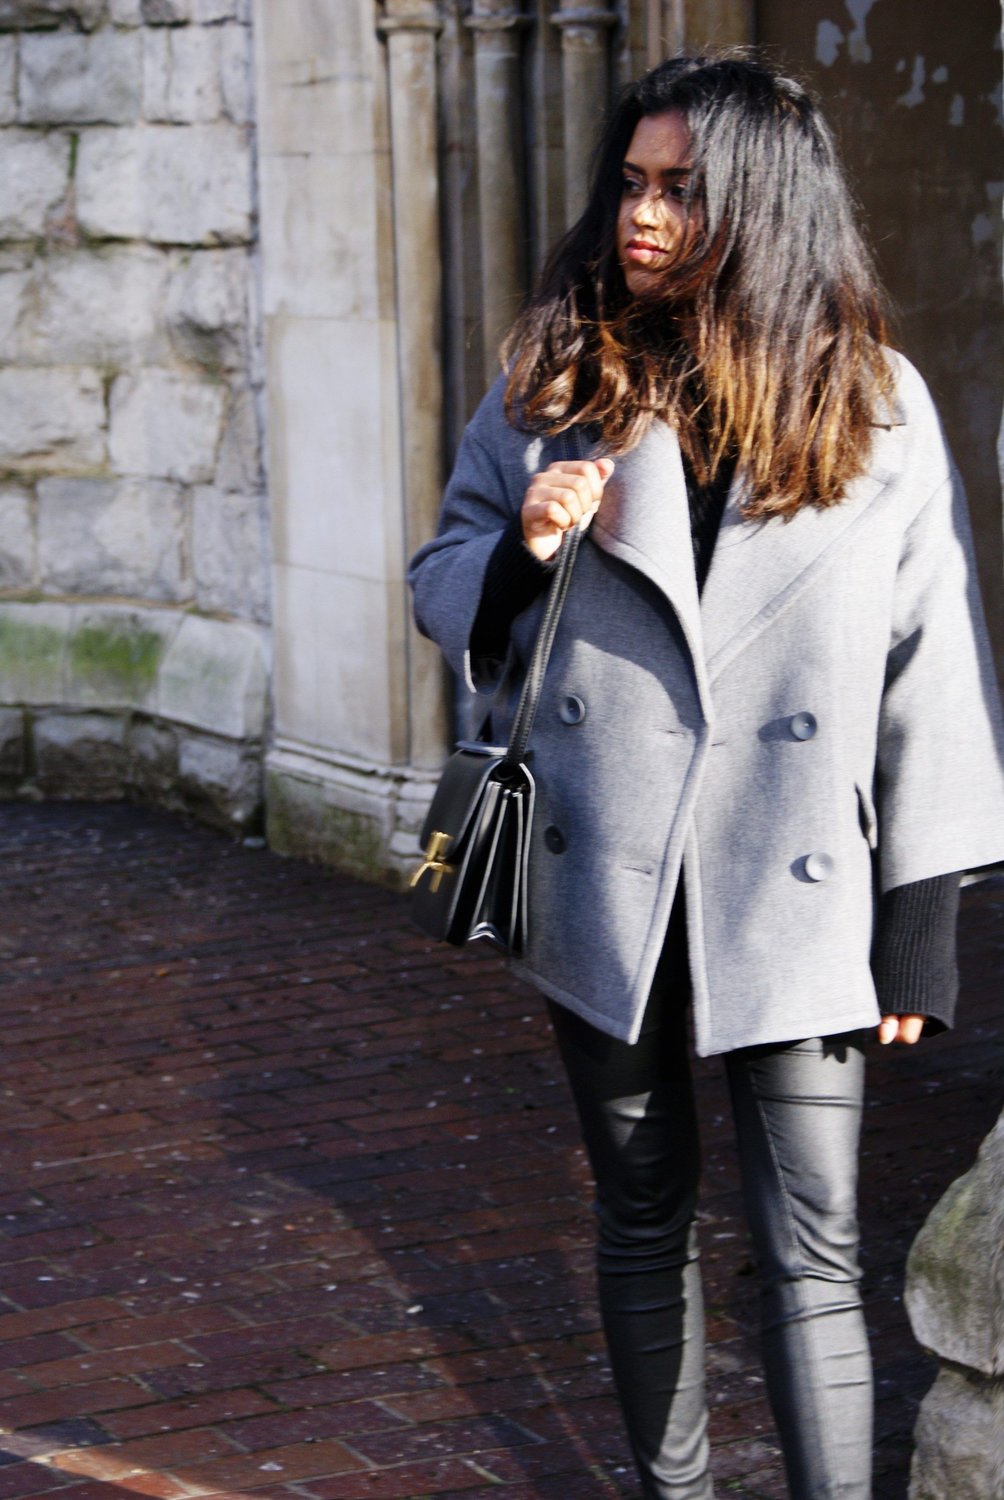 Sachini wearing a grey coat, black trousers with a black bag